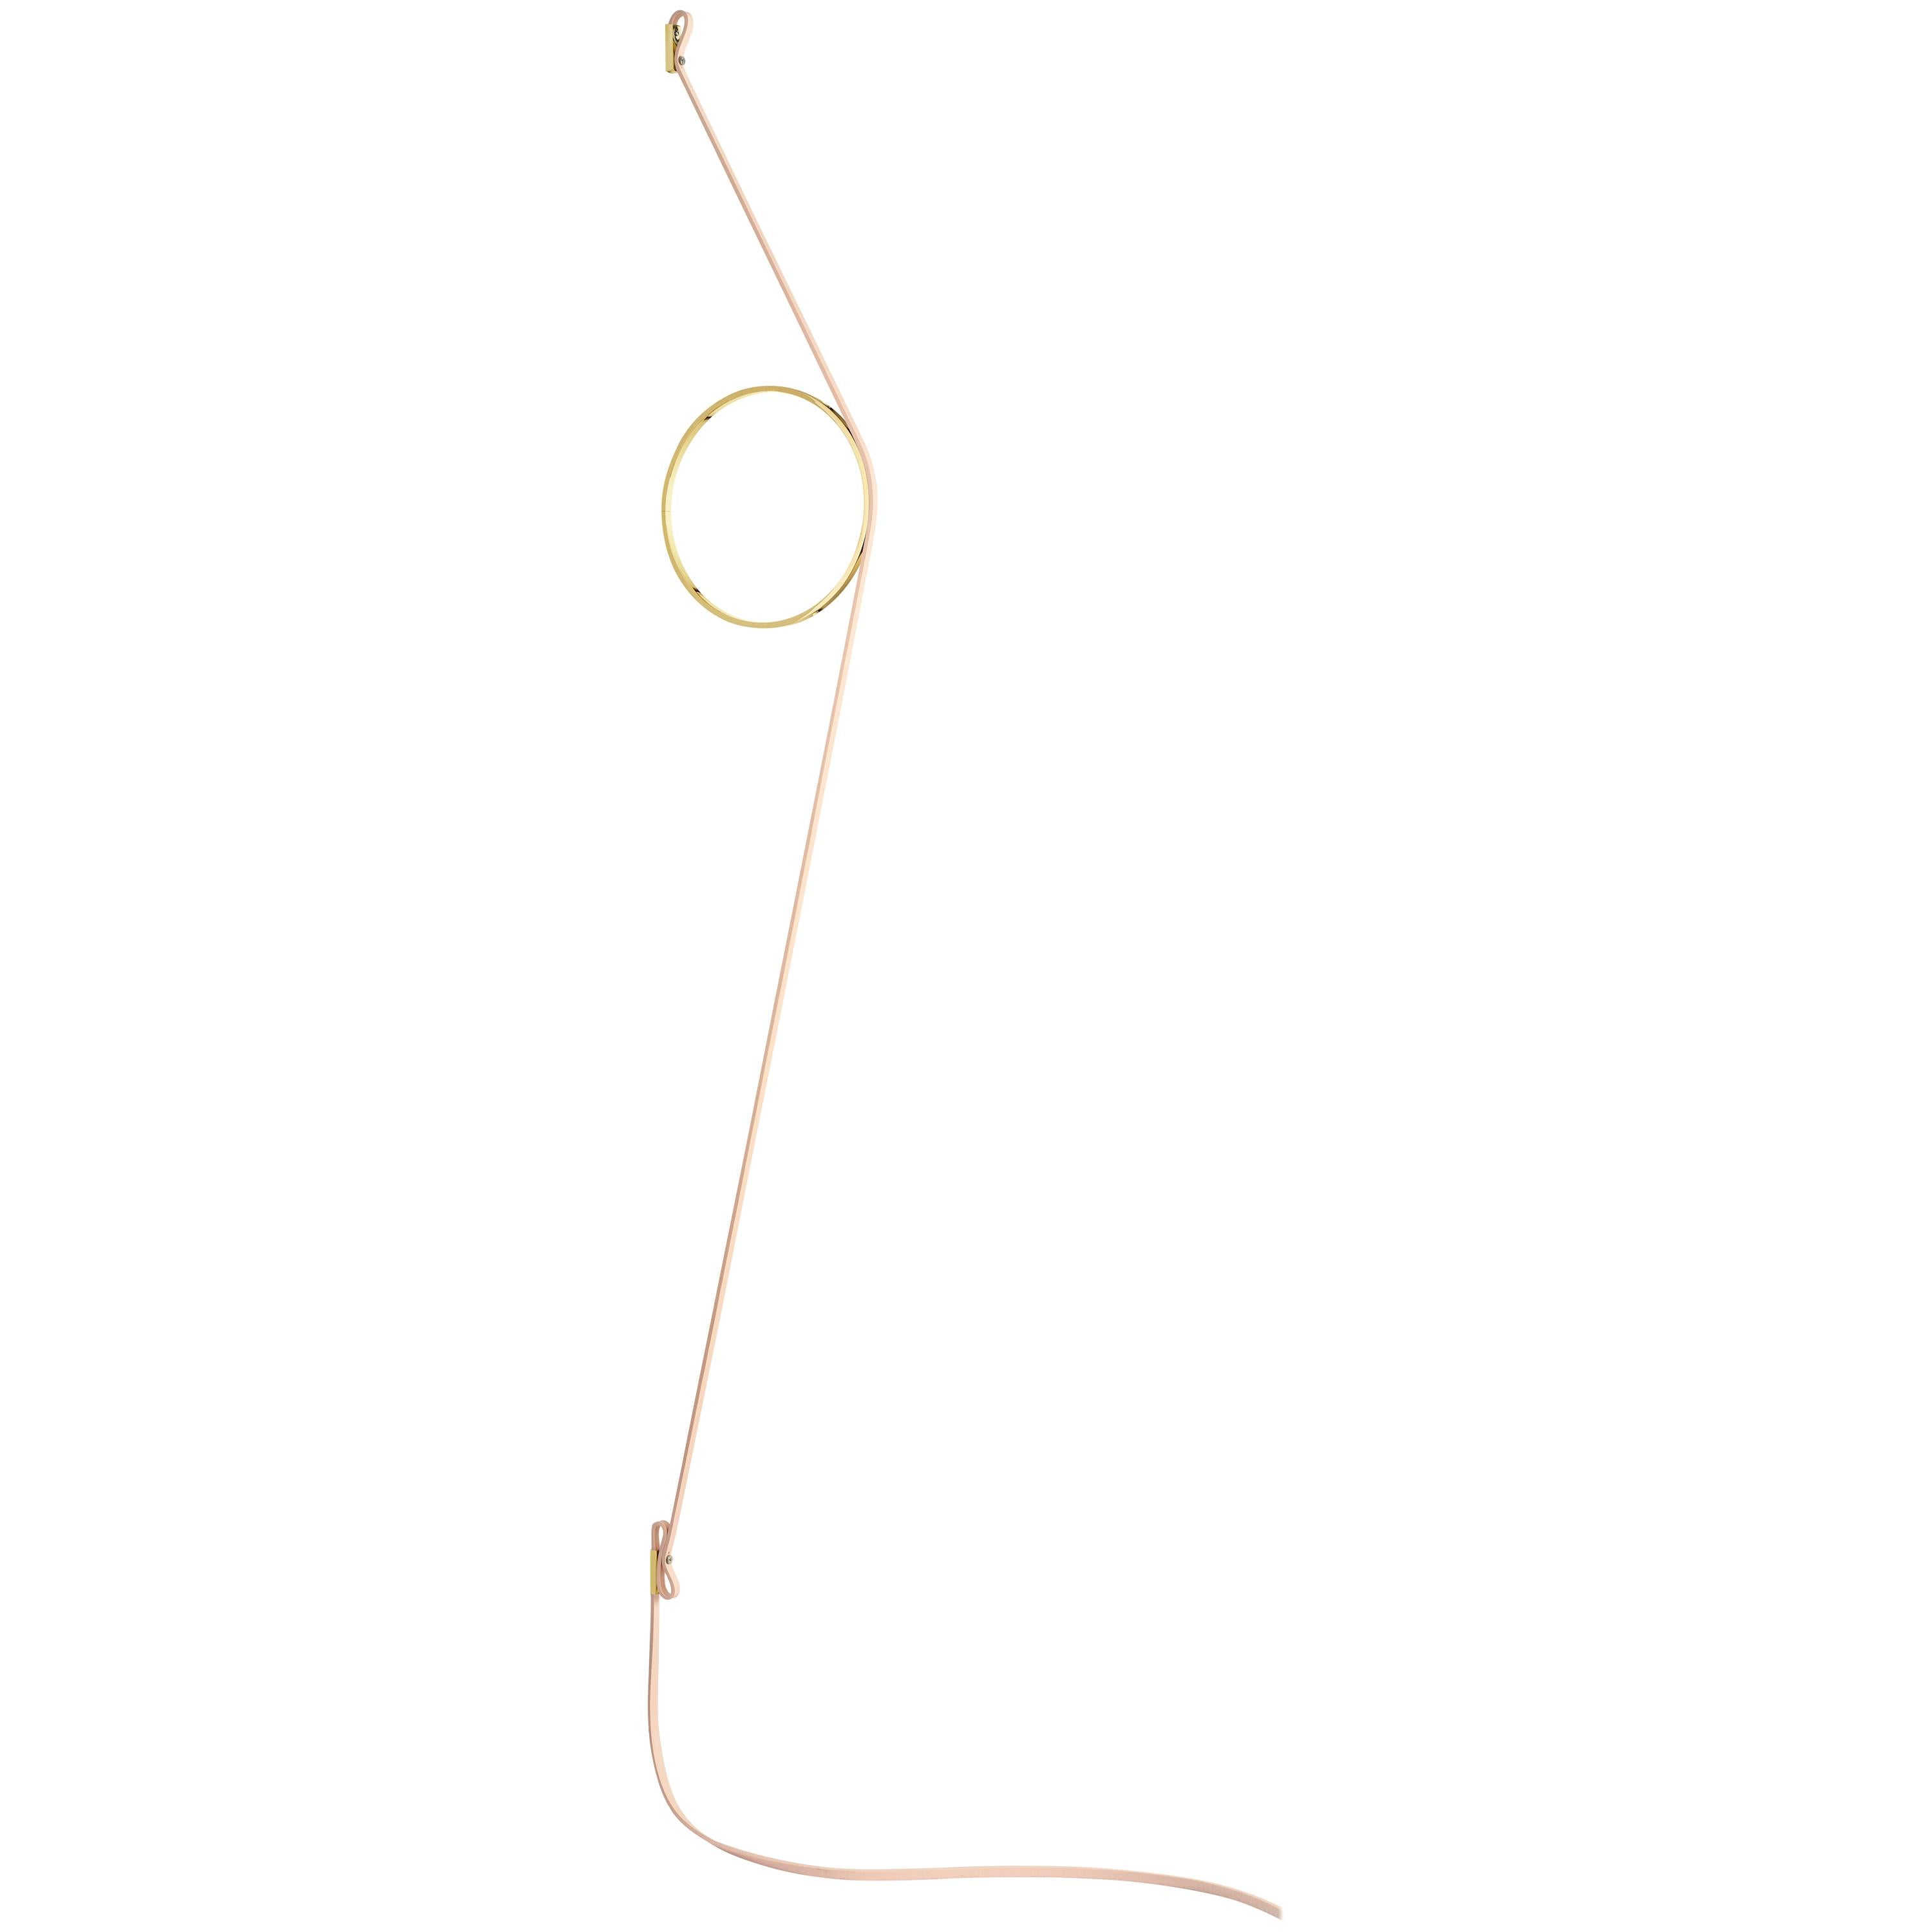 FLOS Wirering Wall Light in Pink and Gold by Formafantasma